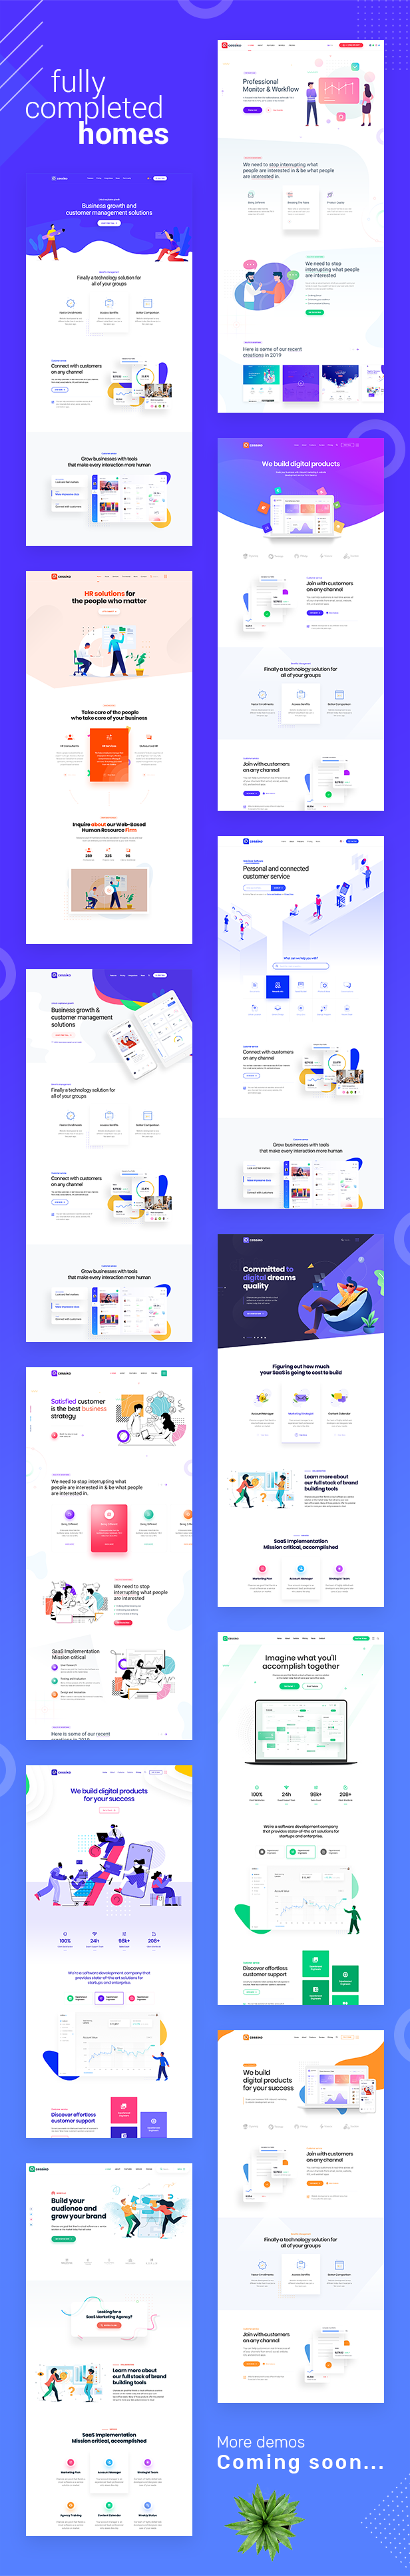 fully%20completed%20home - Sassico - Saas Startup Multipurpose WordPress Theme